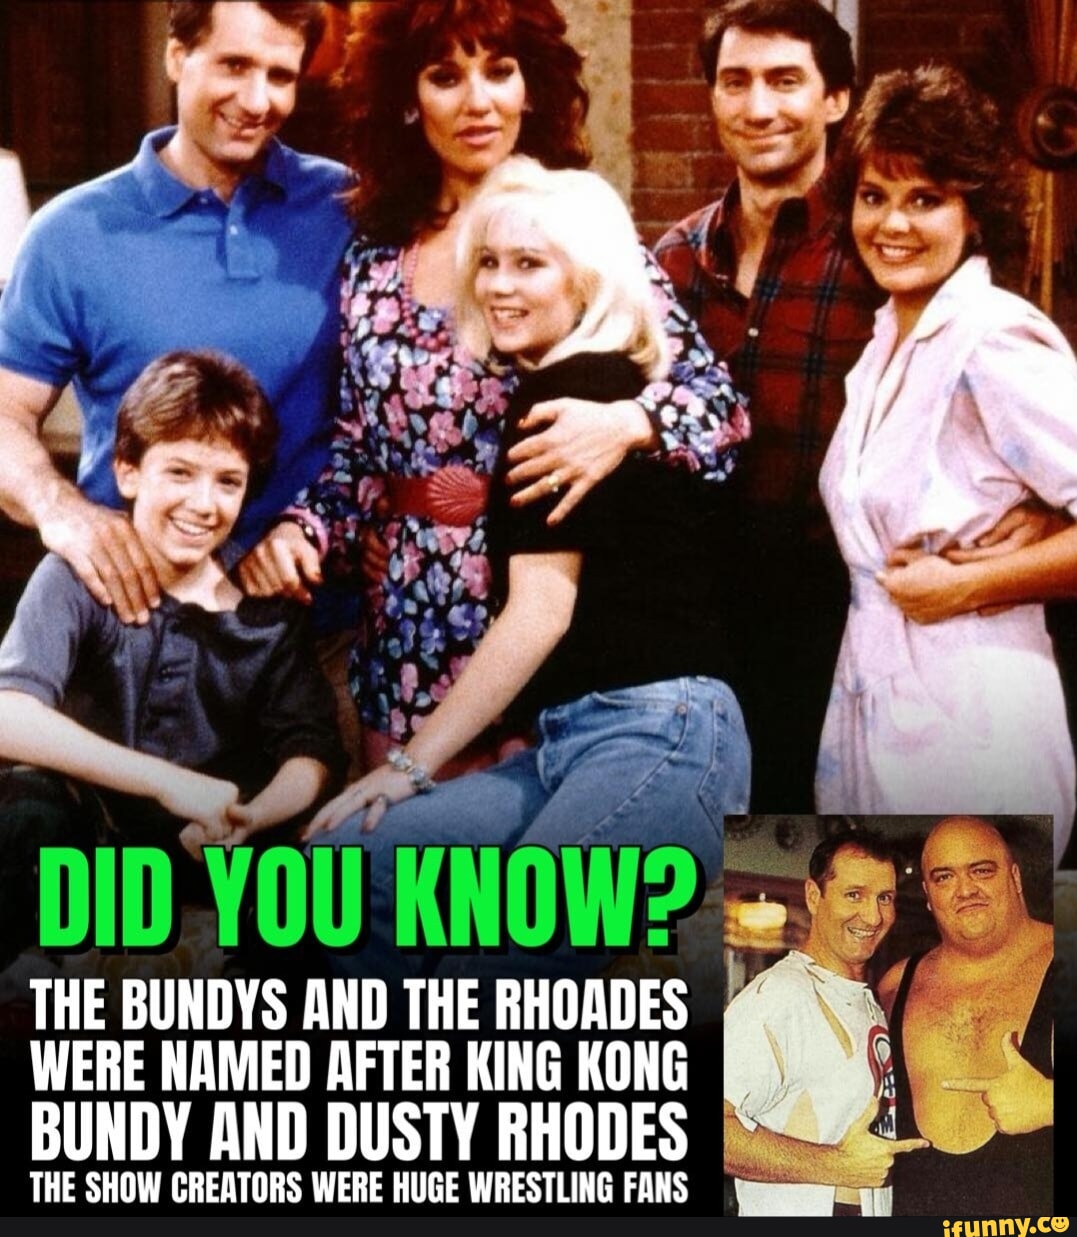 The Bundys And The Rhoades Were Named After King Kong Bundy And Dusty